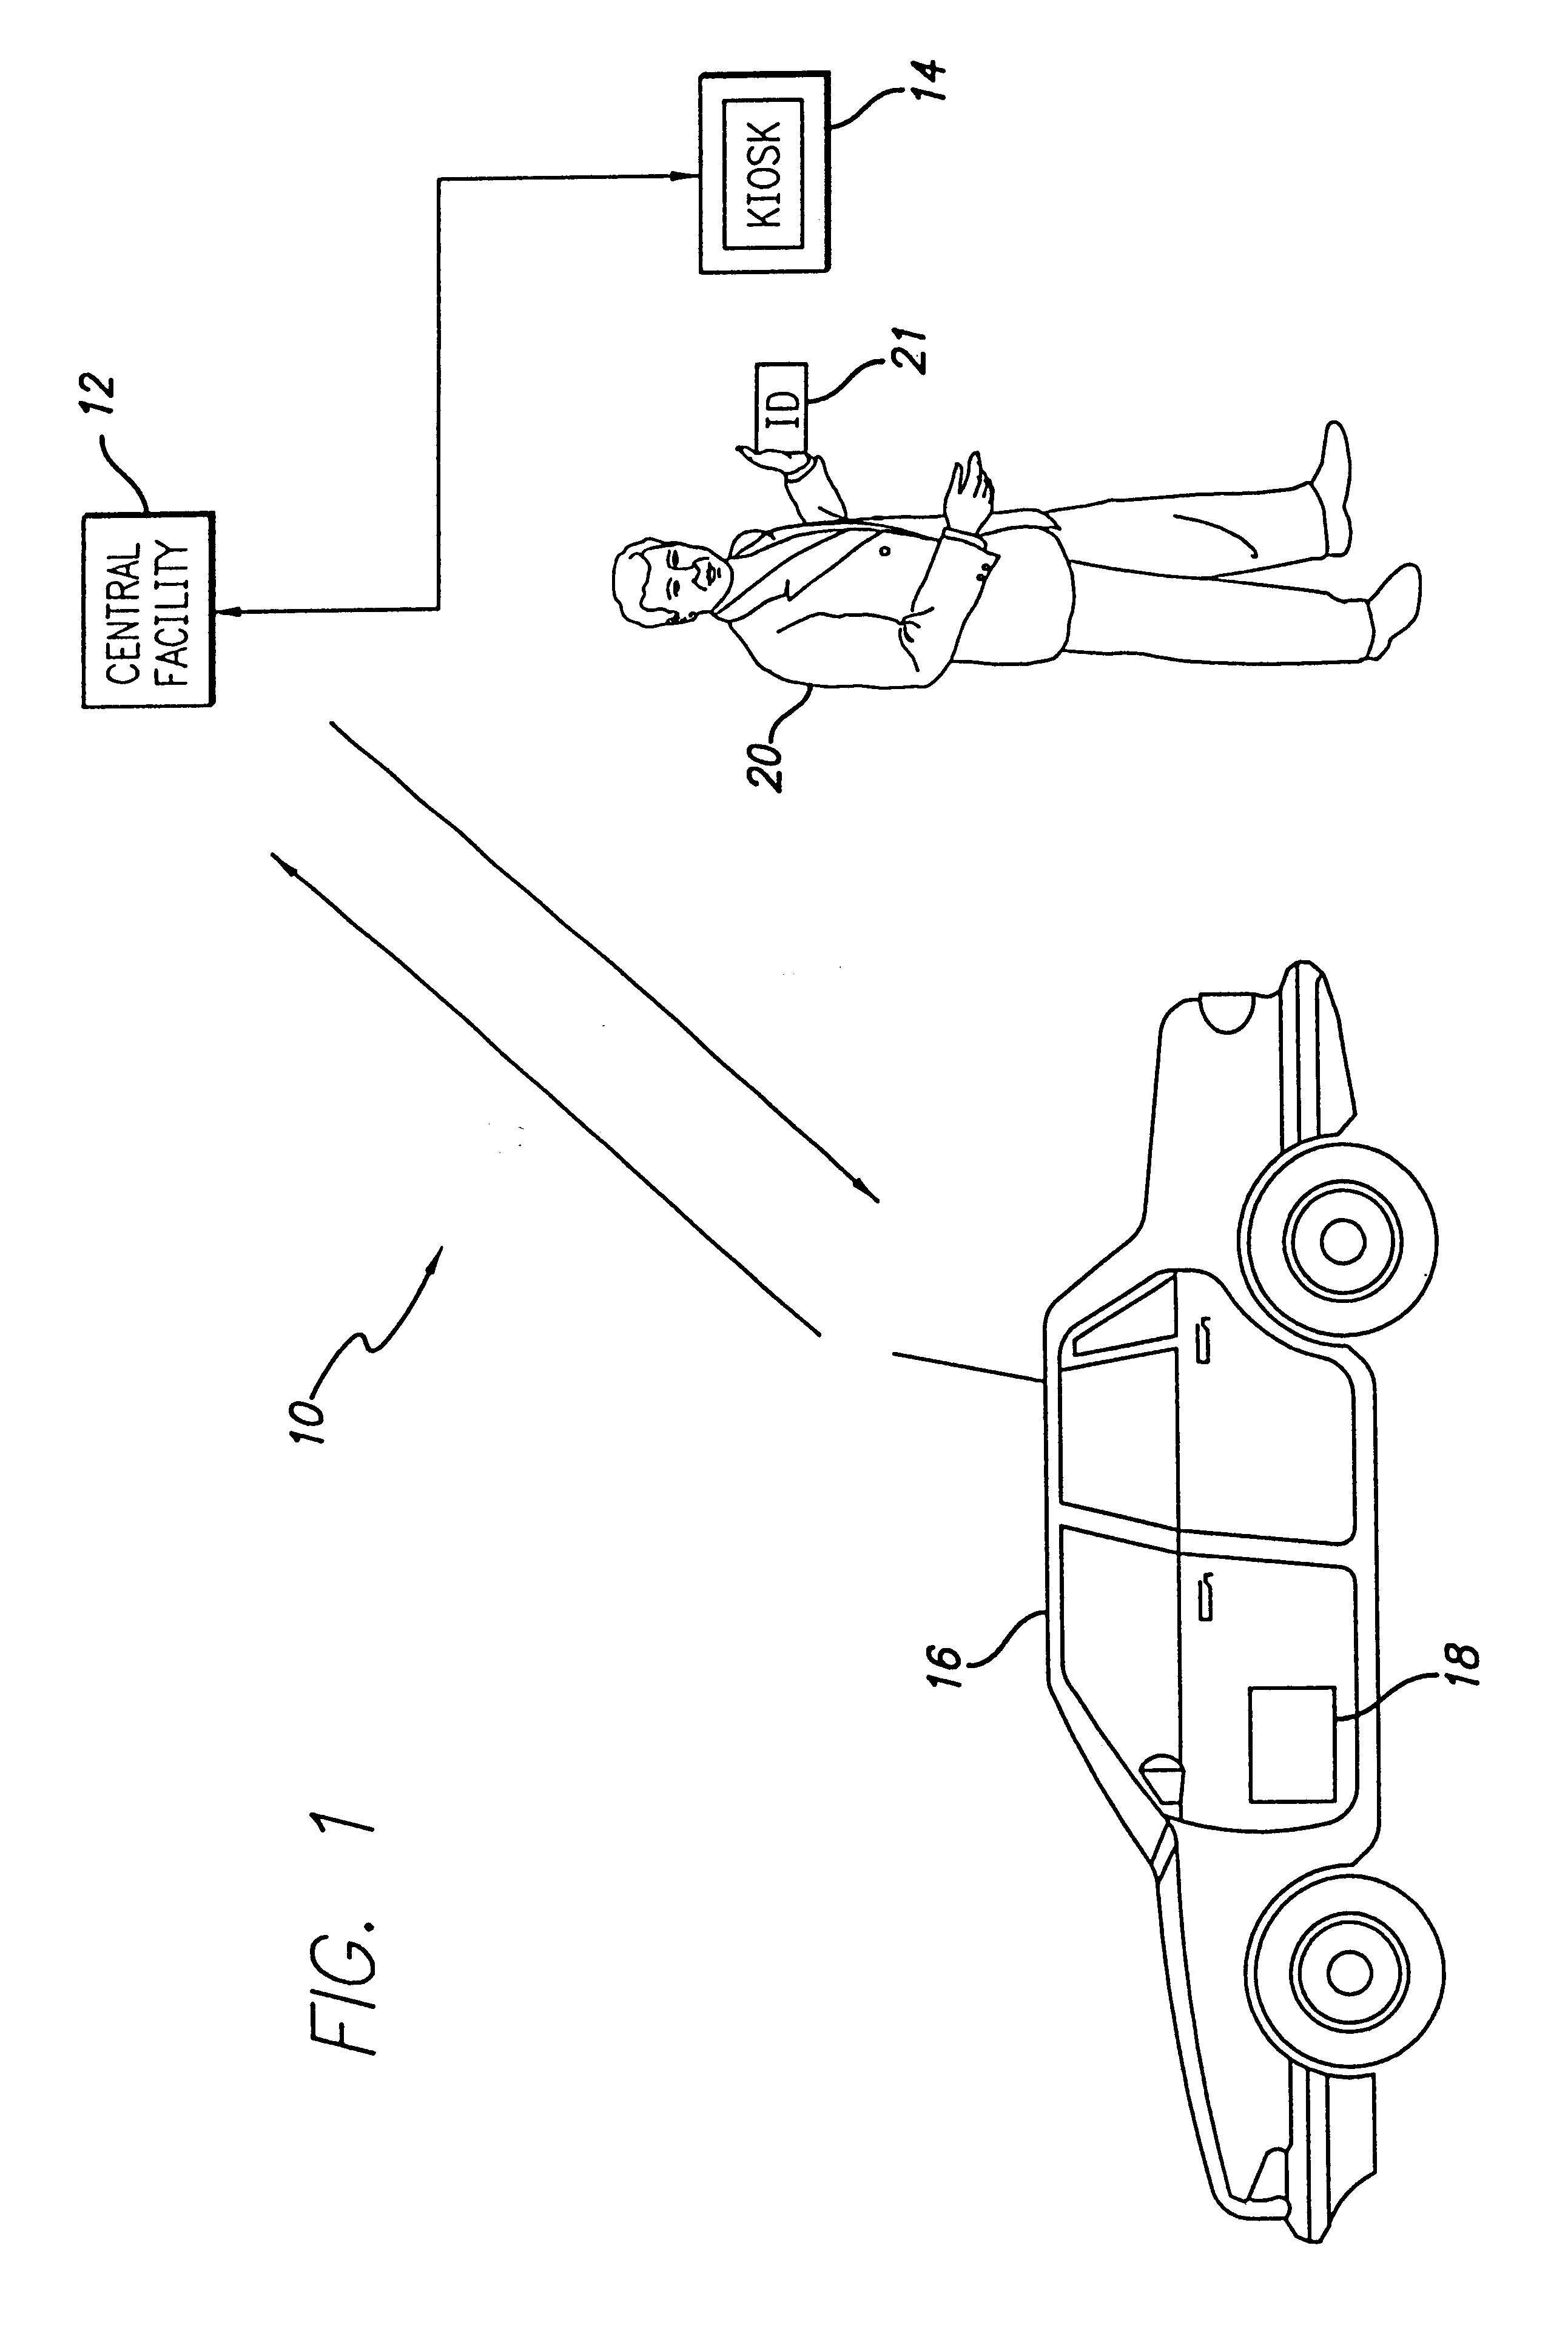 Vehicle sharing system and method for controlling or securing vehicle access and/or enablement